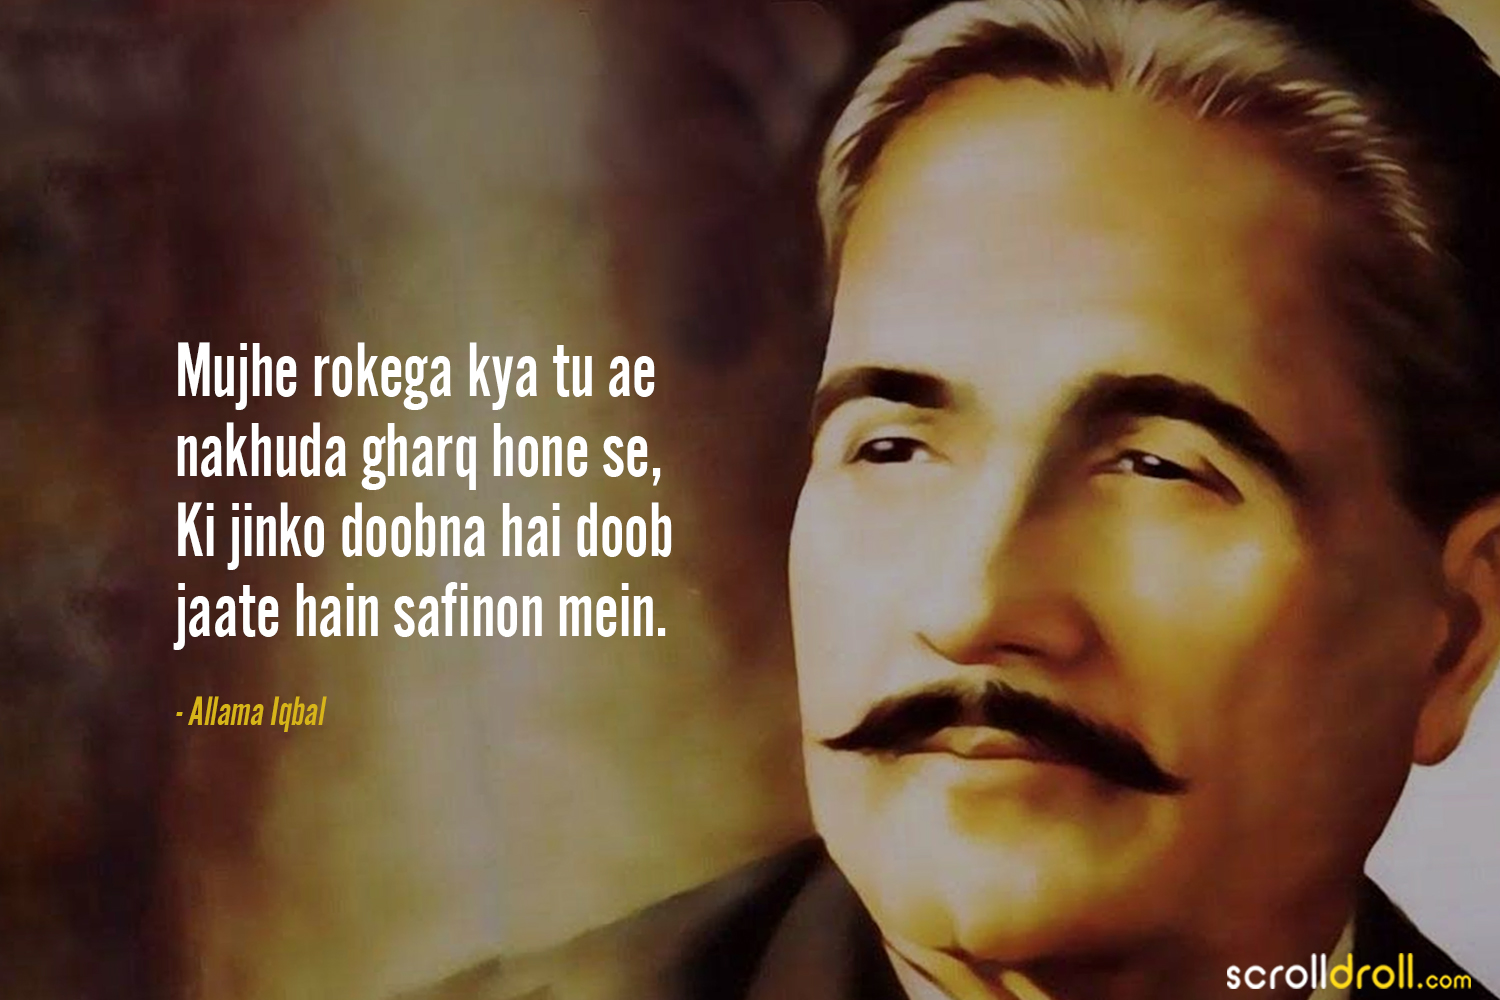 Shayaris-By-Allama-Iqbal-9 - The Best of Indian Pop Culture ...